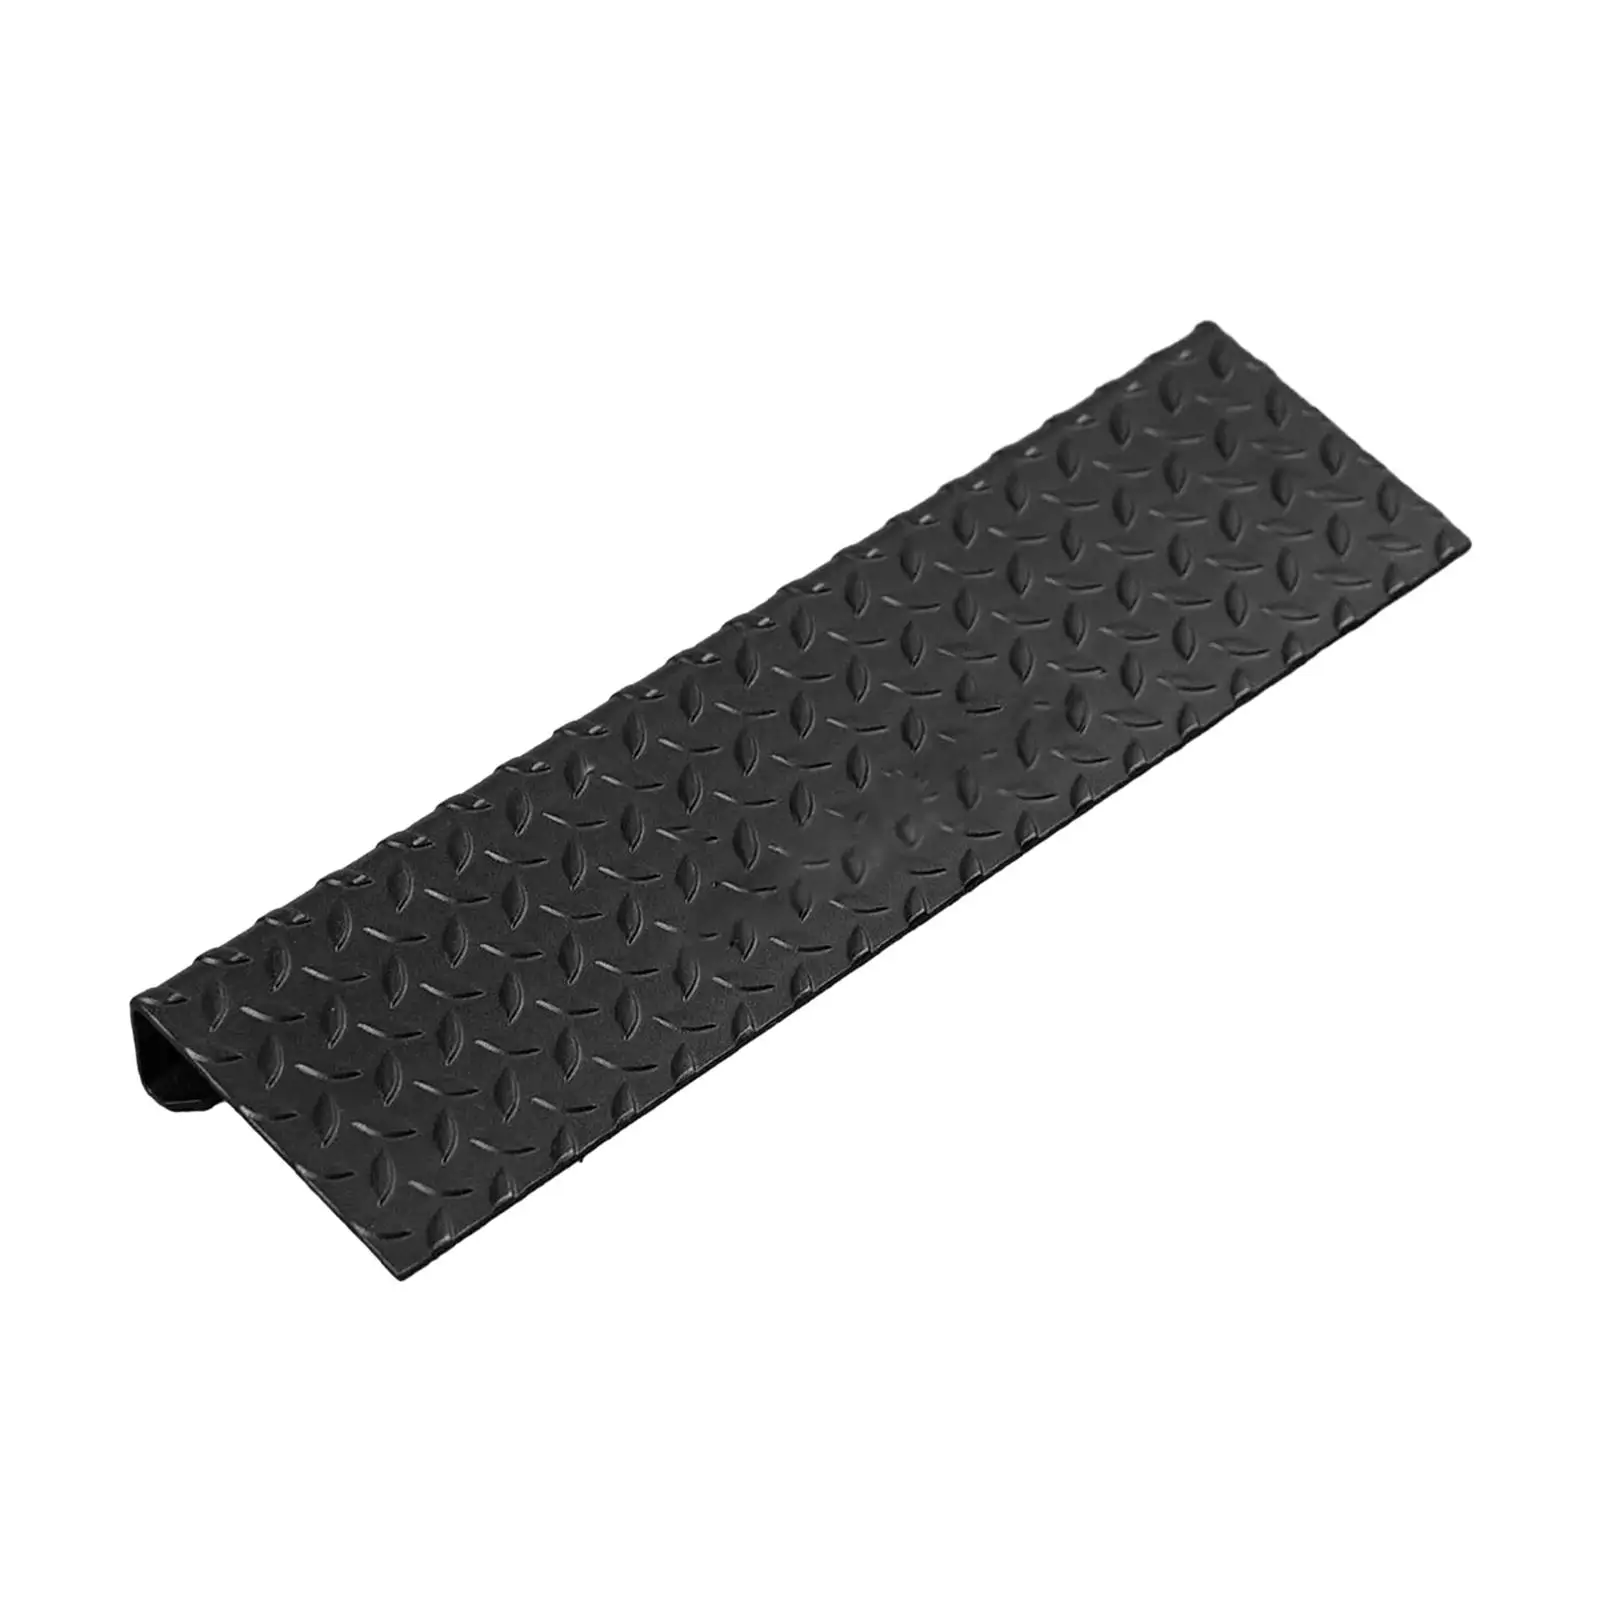 Slant Board Calf Stretcher Stretch Boards Sports Exercise Professional Ankle Joint Correction Muscle Building Foot Incline Board